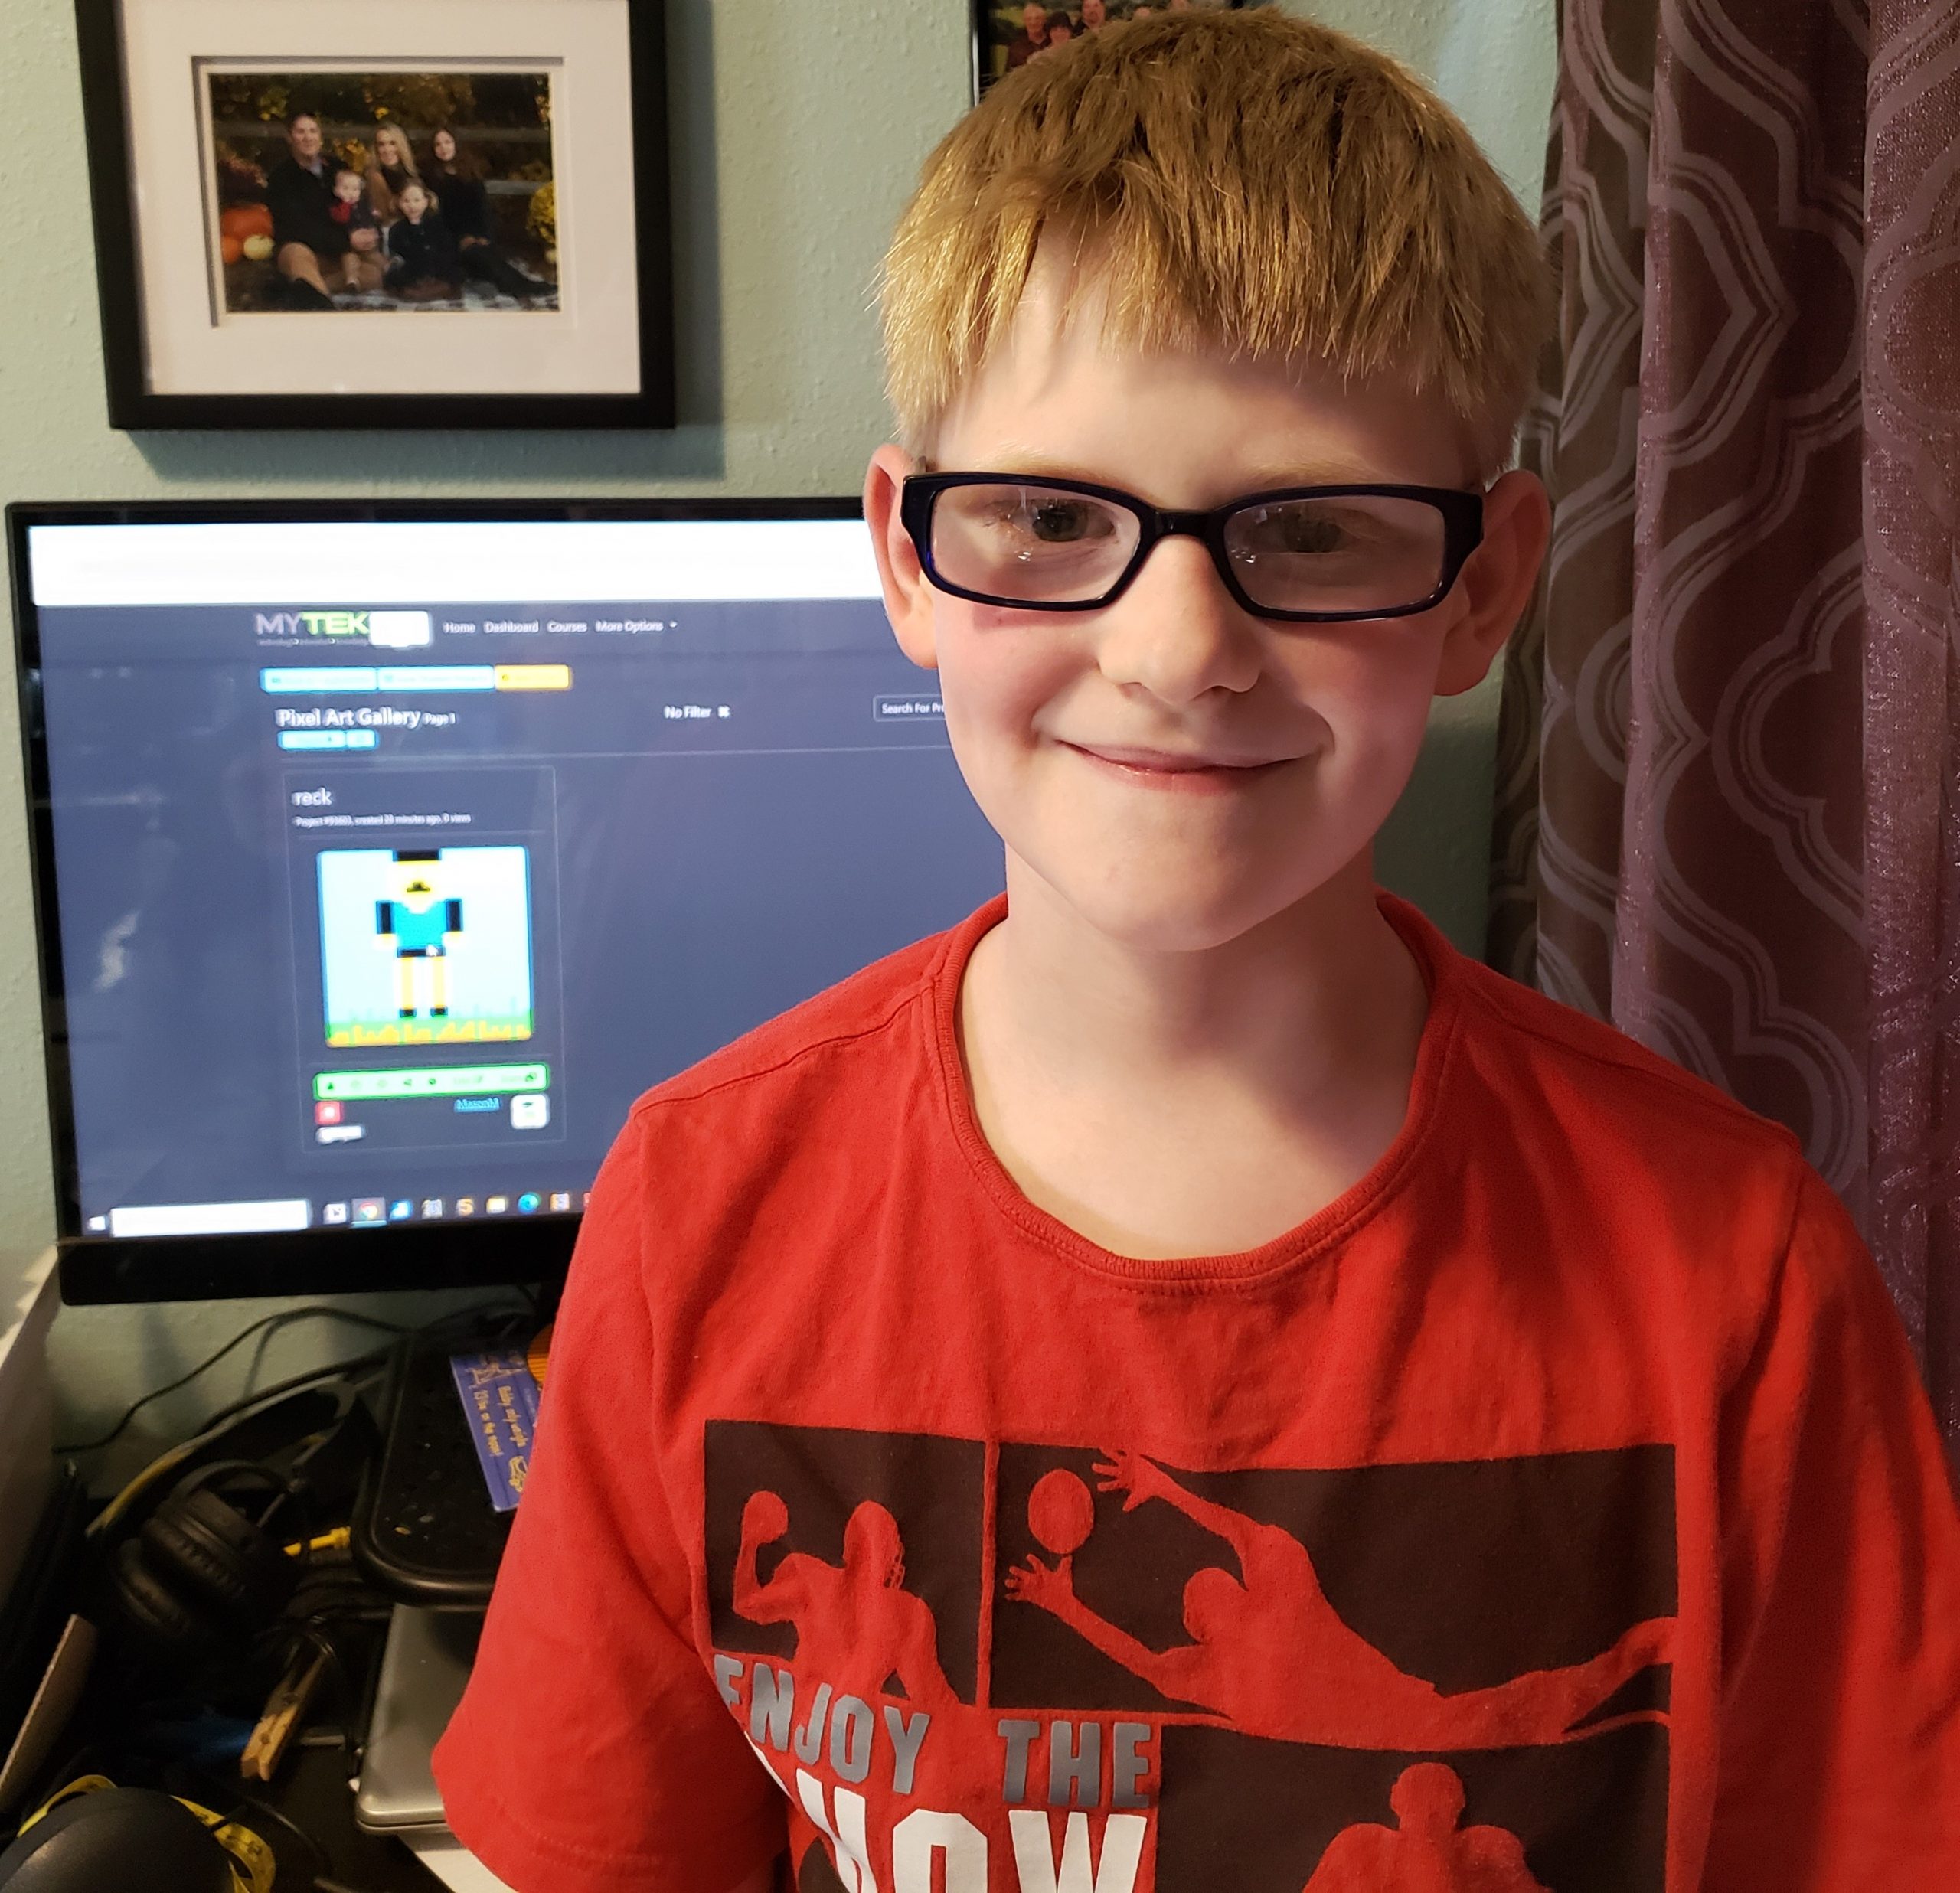 online technology classes smiling boy proudly shows his first image in his pixel art gallery